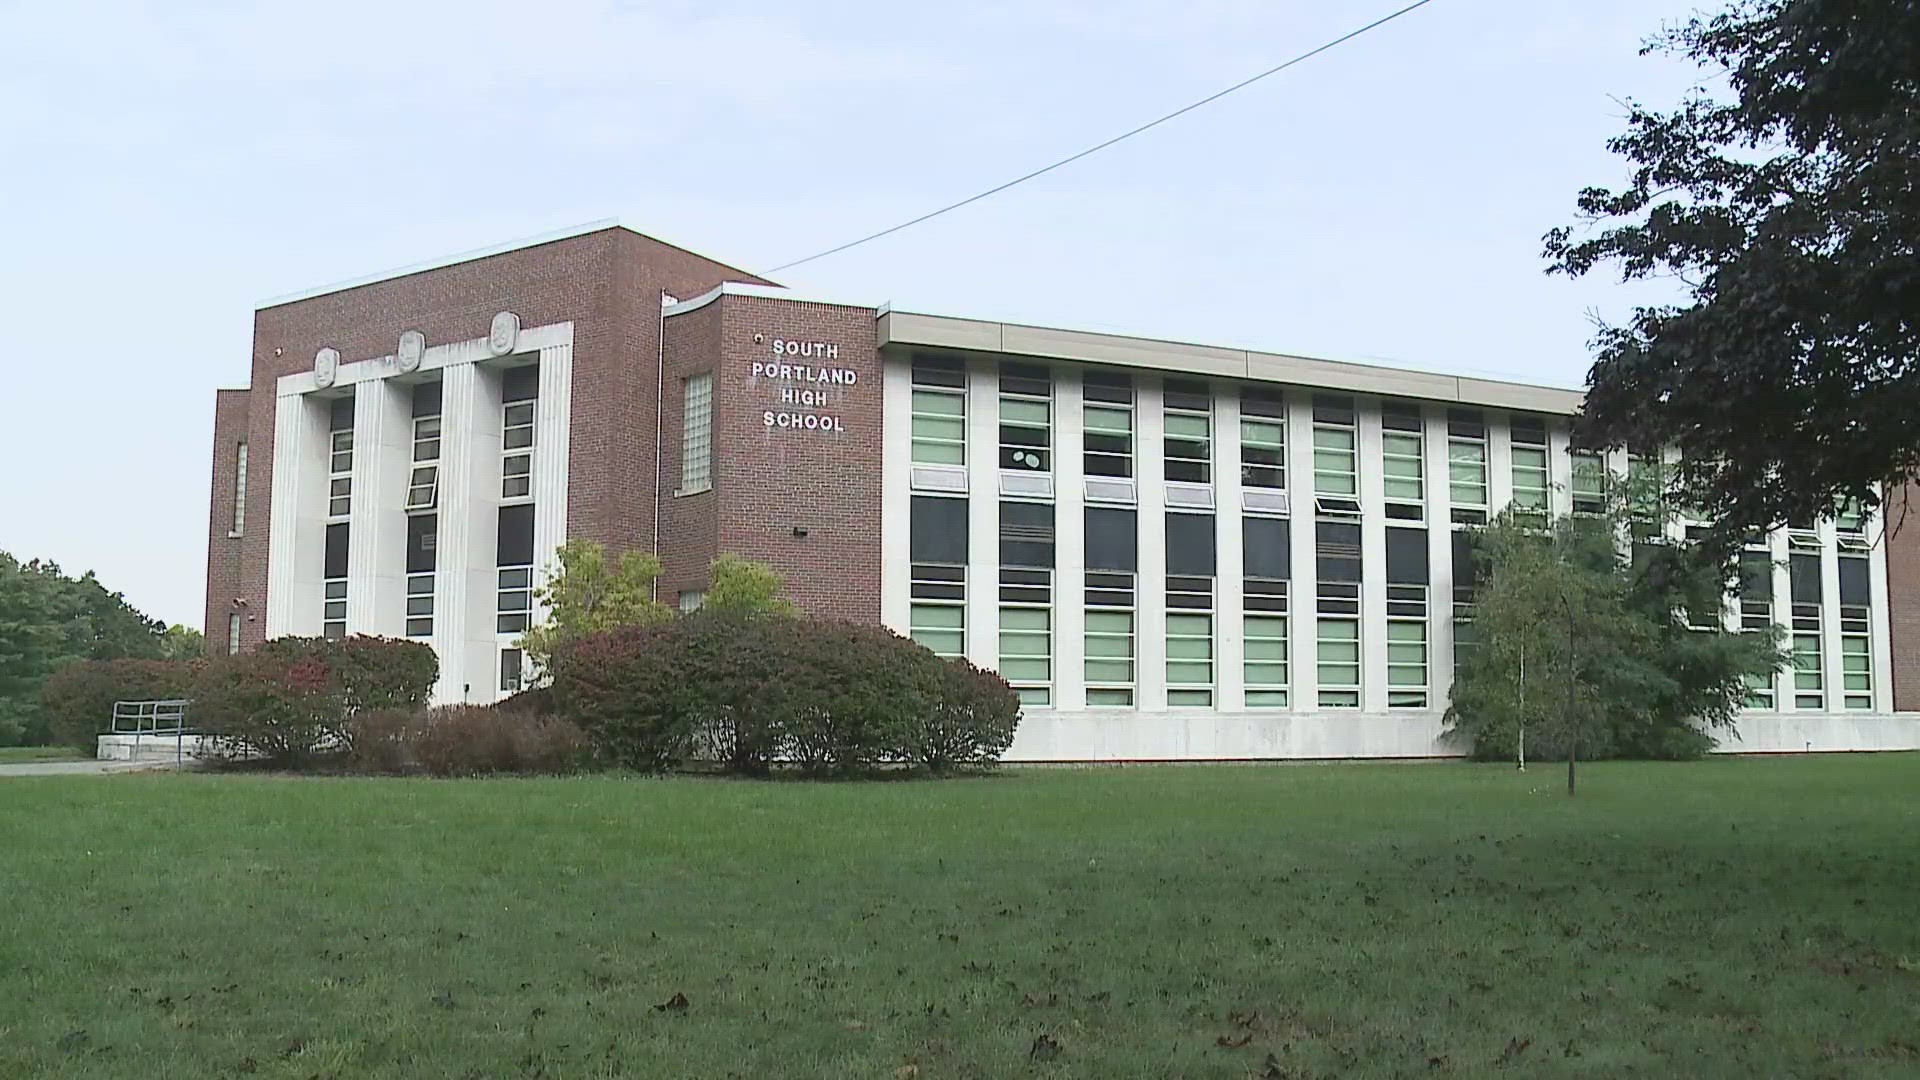 A juvenile was taken into custody Friday following an incident at South Portland High School that prompted a lockdown on Friday.